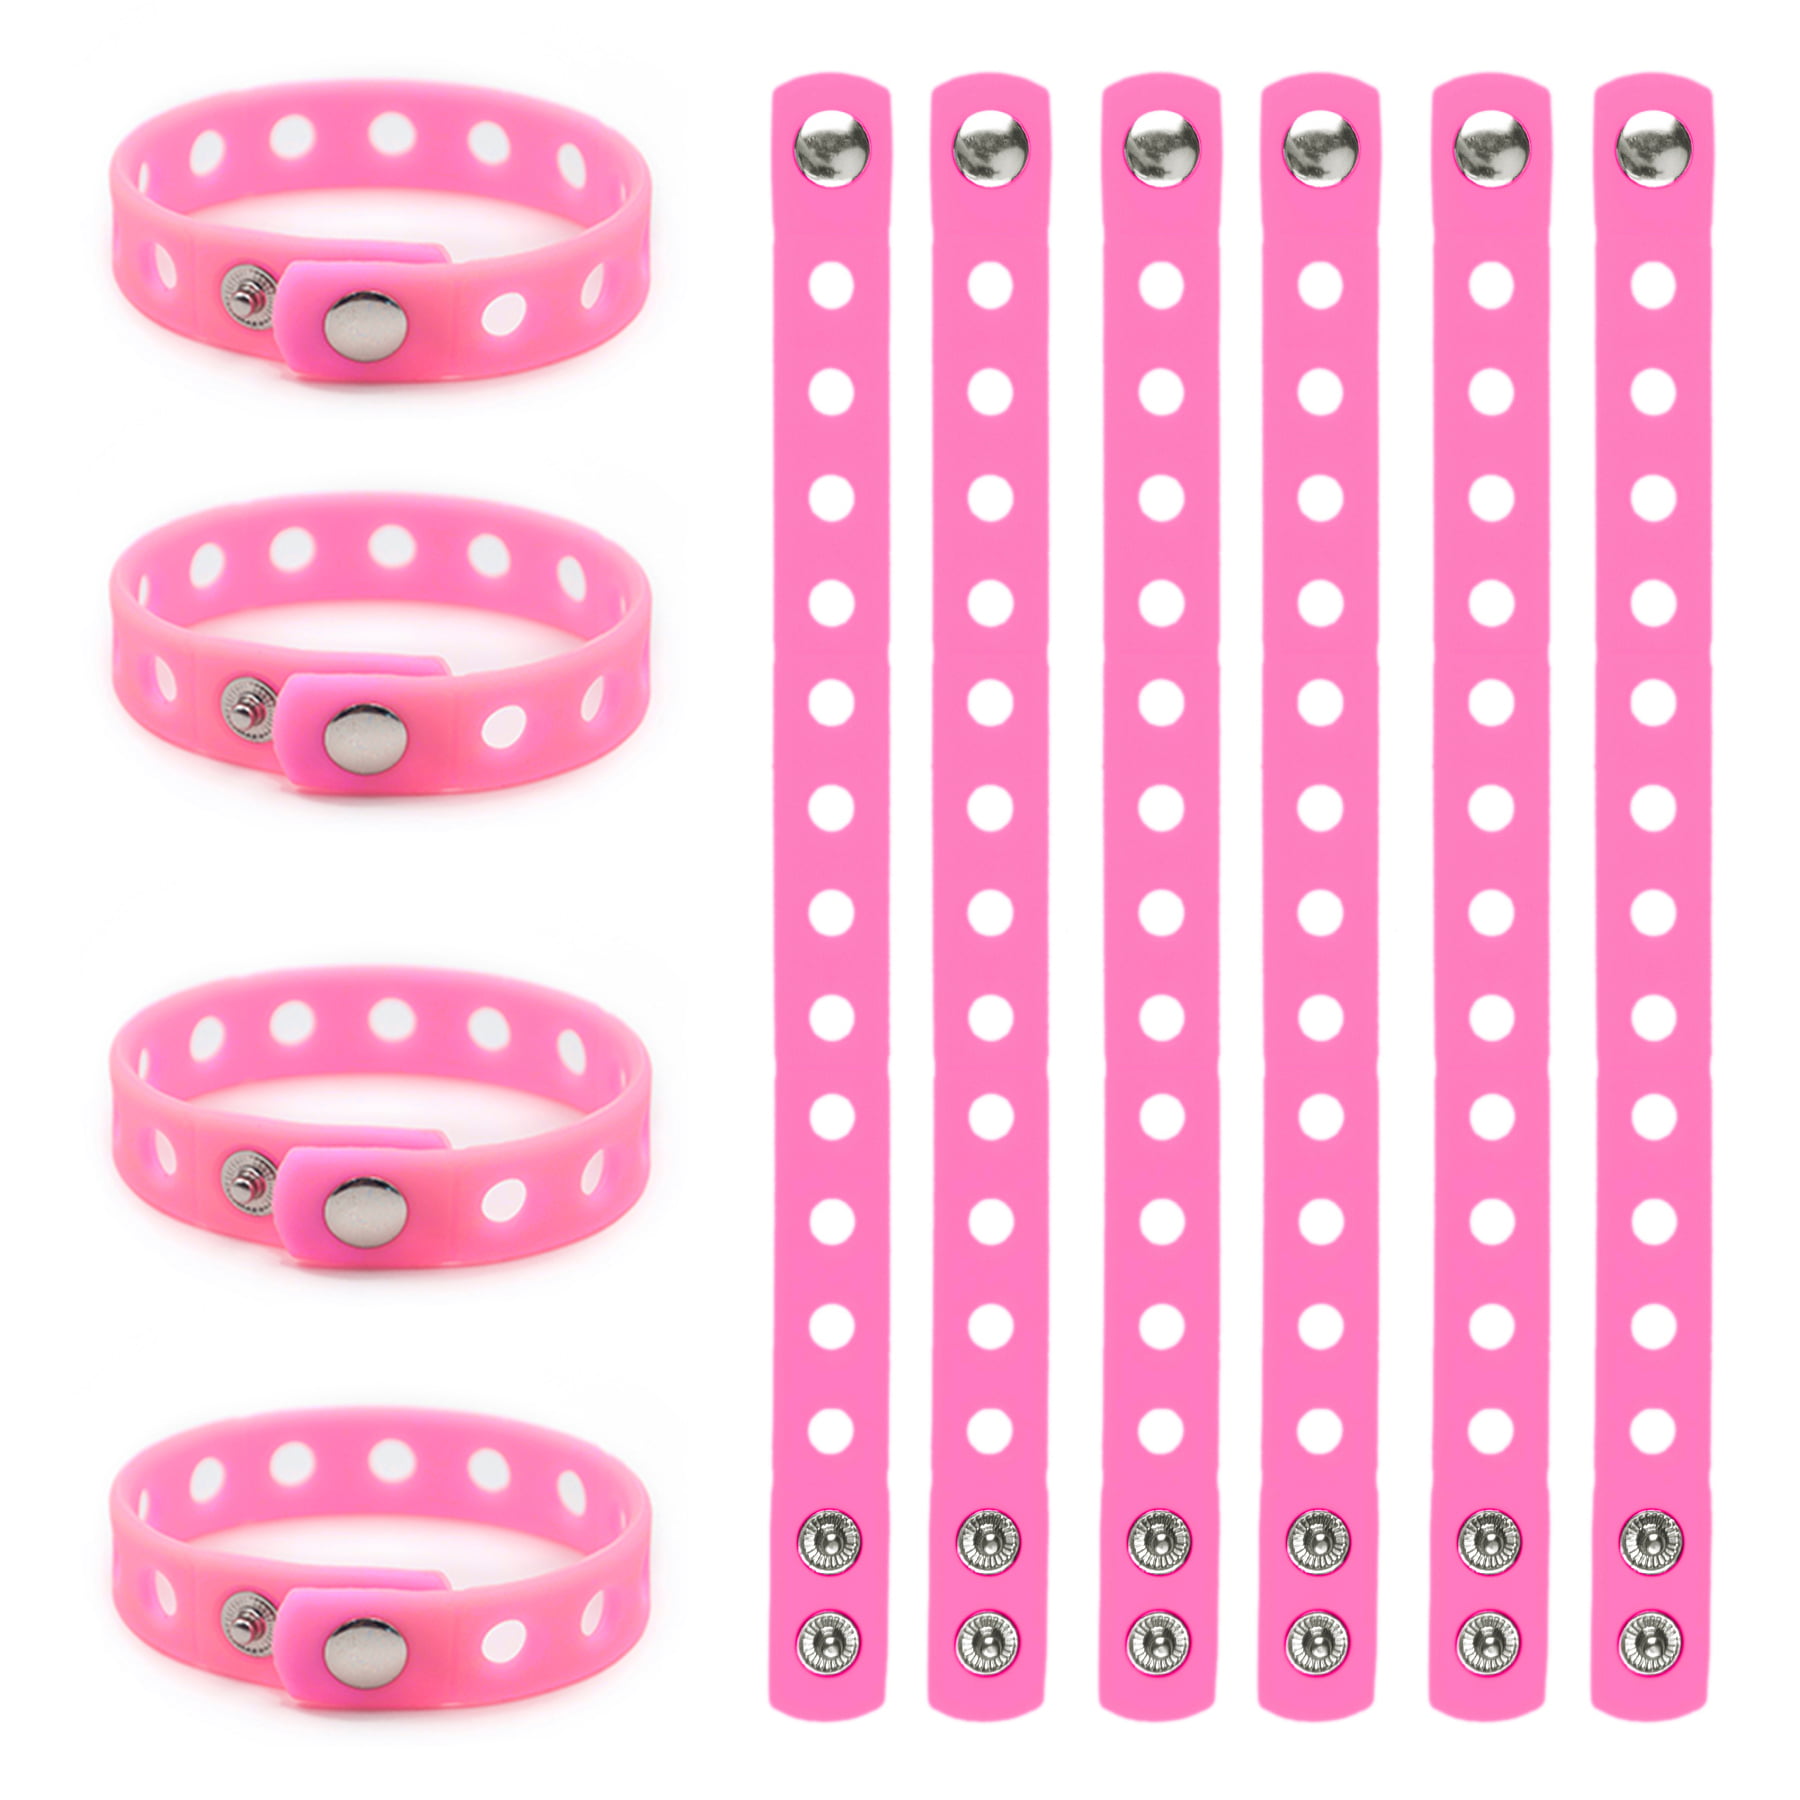 YAOYAO Different 100 Pcs PVC Shoe Charms for Croc & Jibbitz Bands Bracelet Wristband for The Beach Camping 